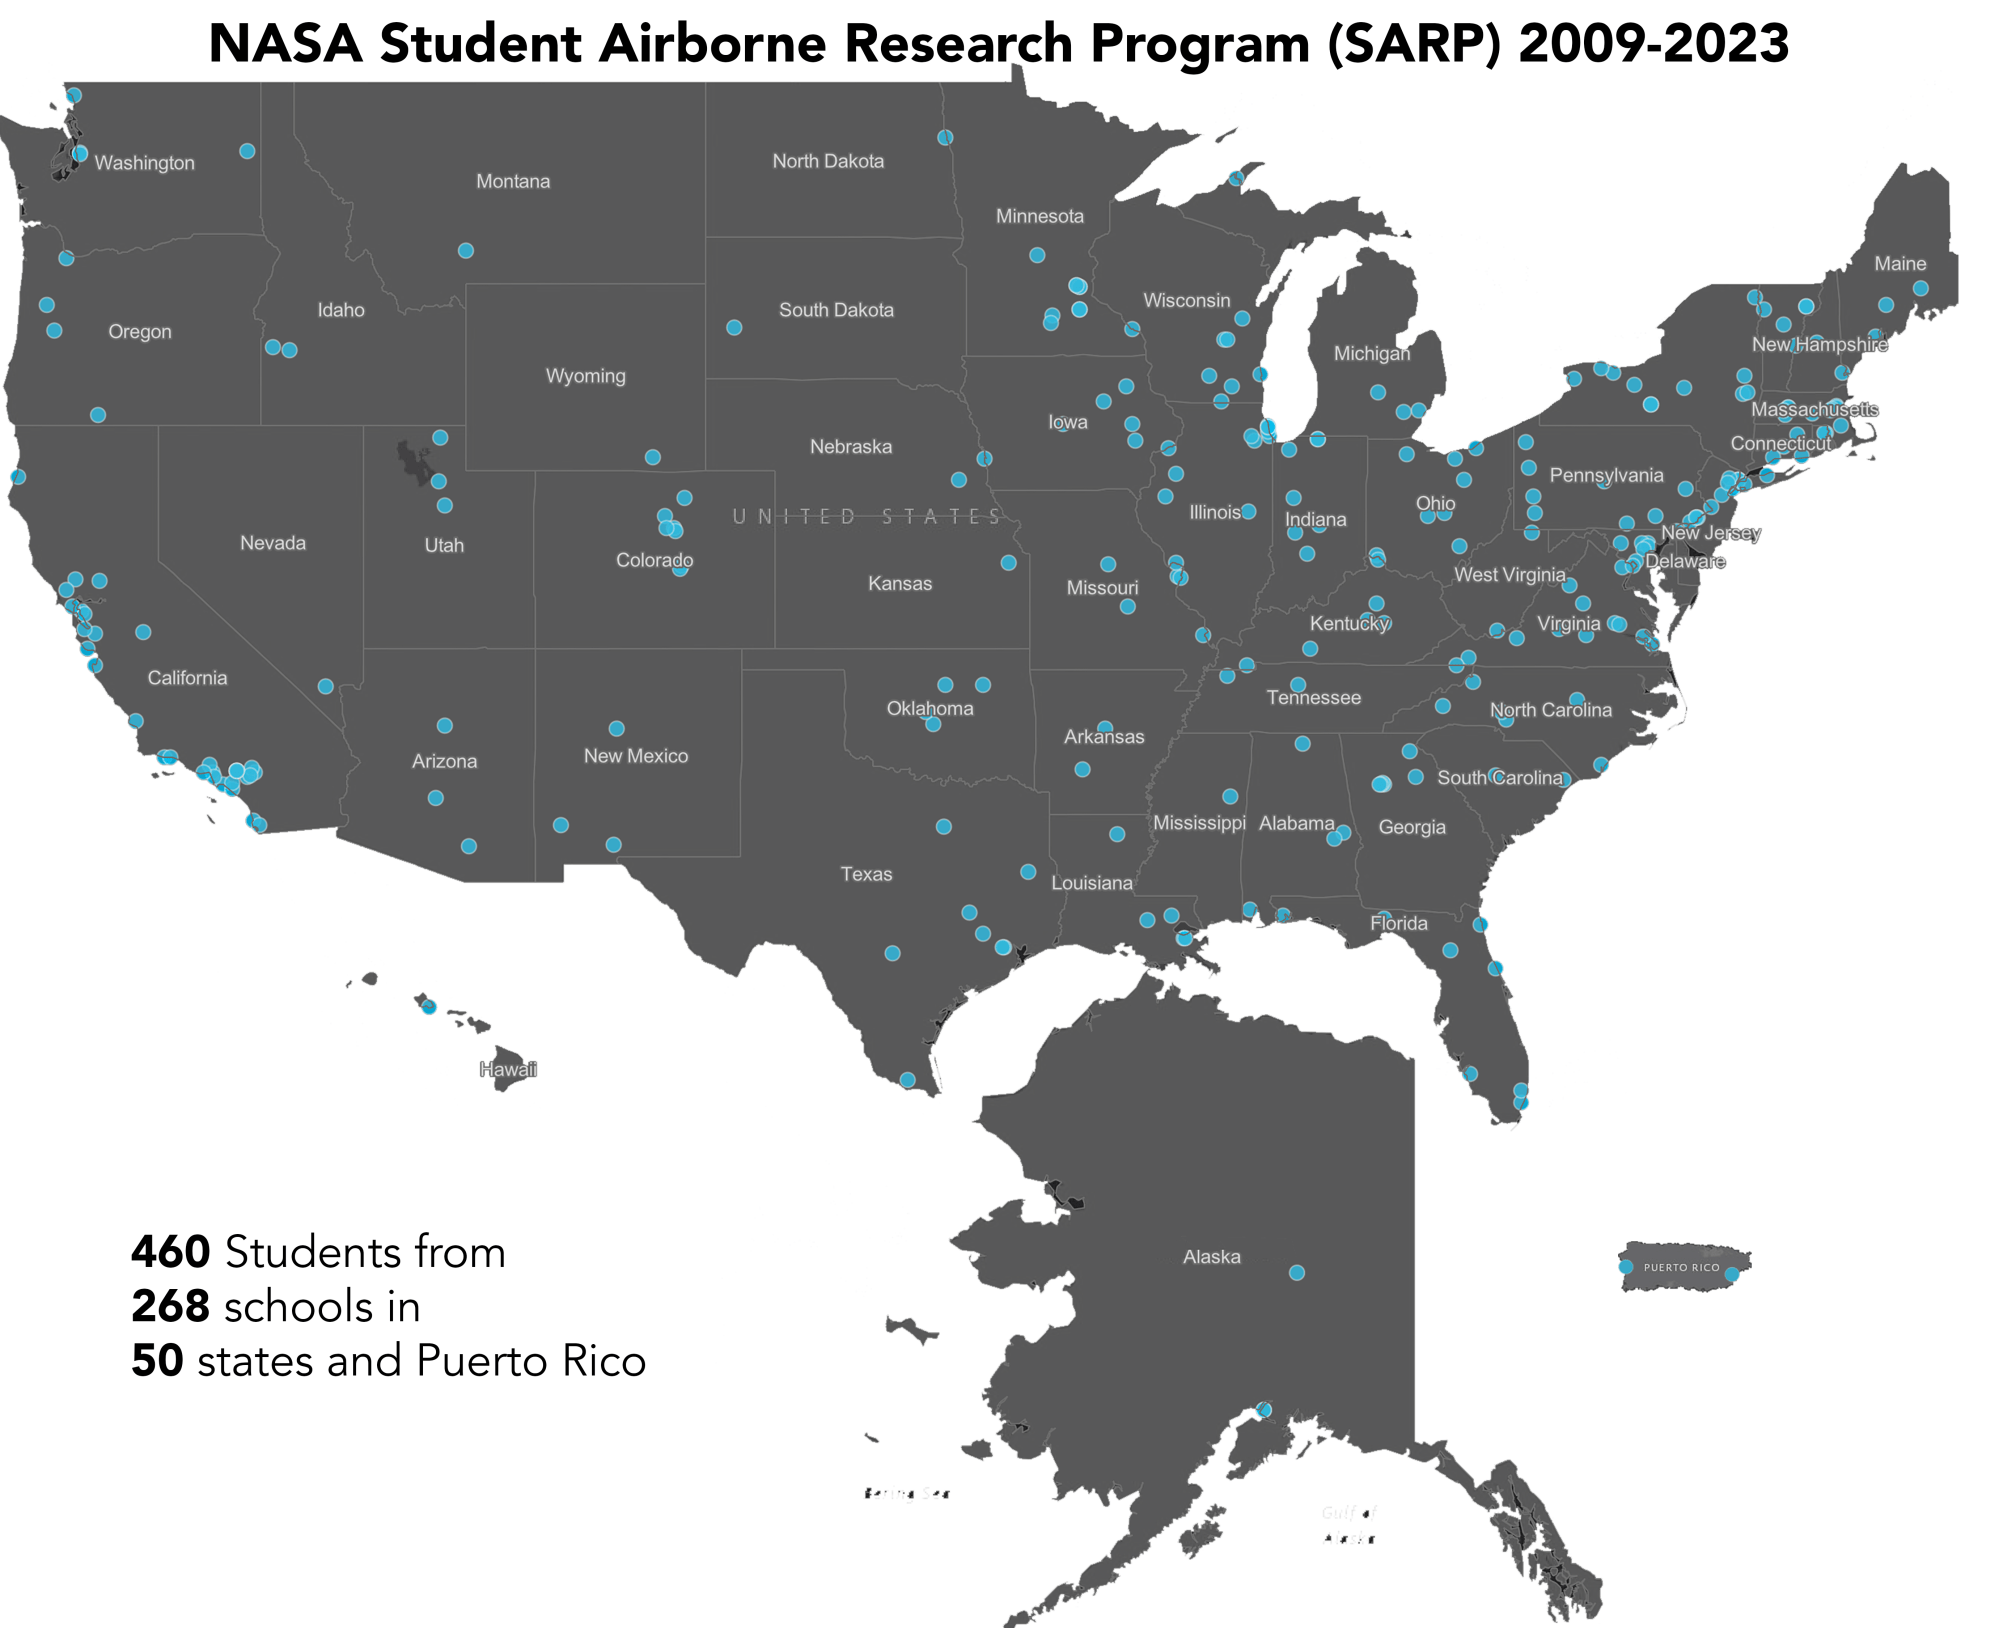 Map of the US with locations of SARP students’ institutions. 460 SARP students are from 268 different schools in all 50 states as well as Puerto Rico.